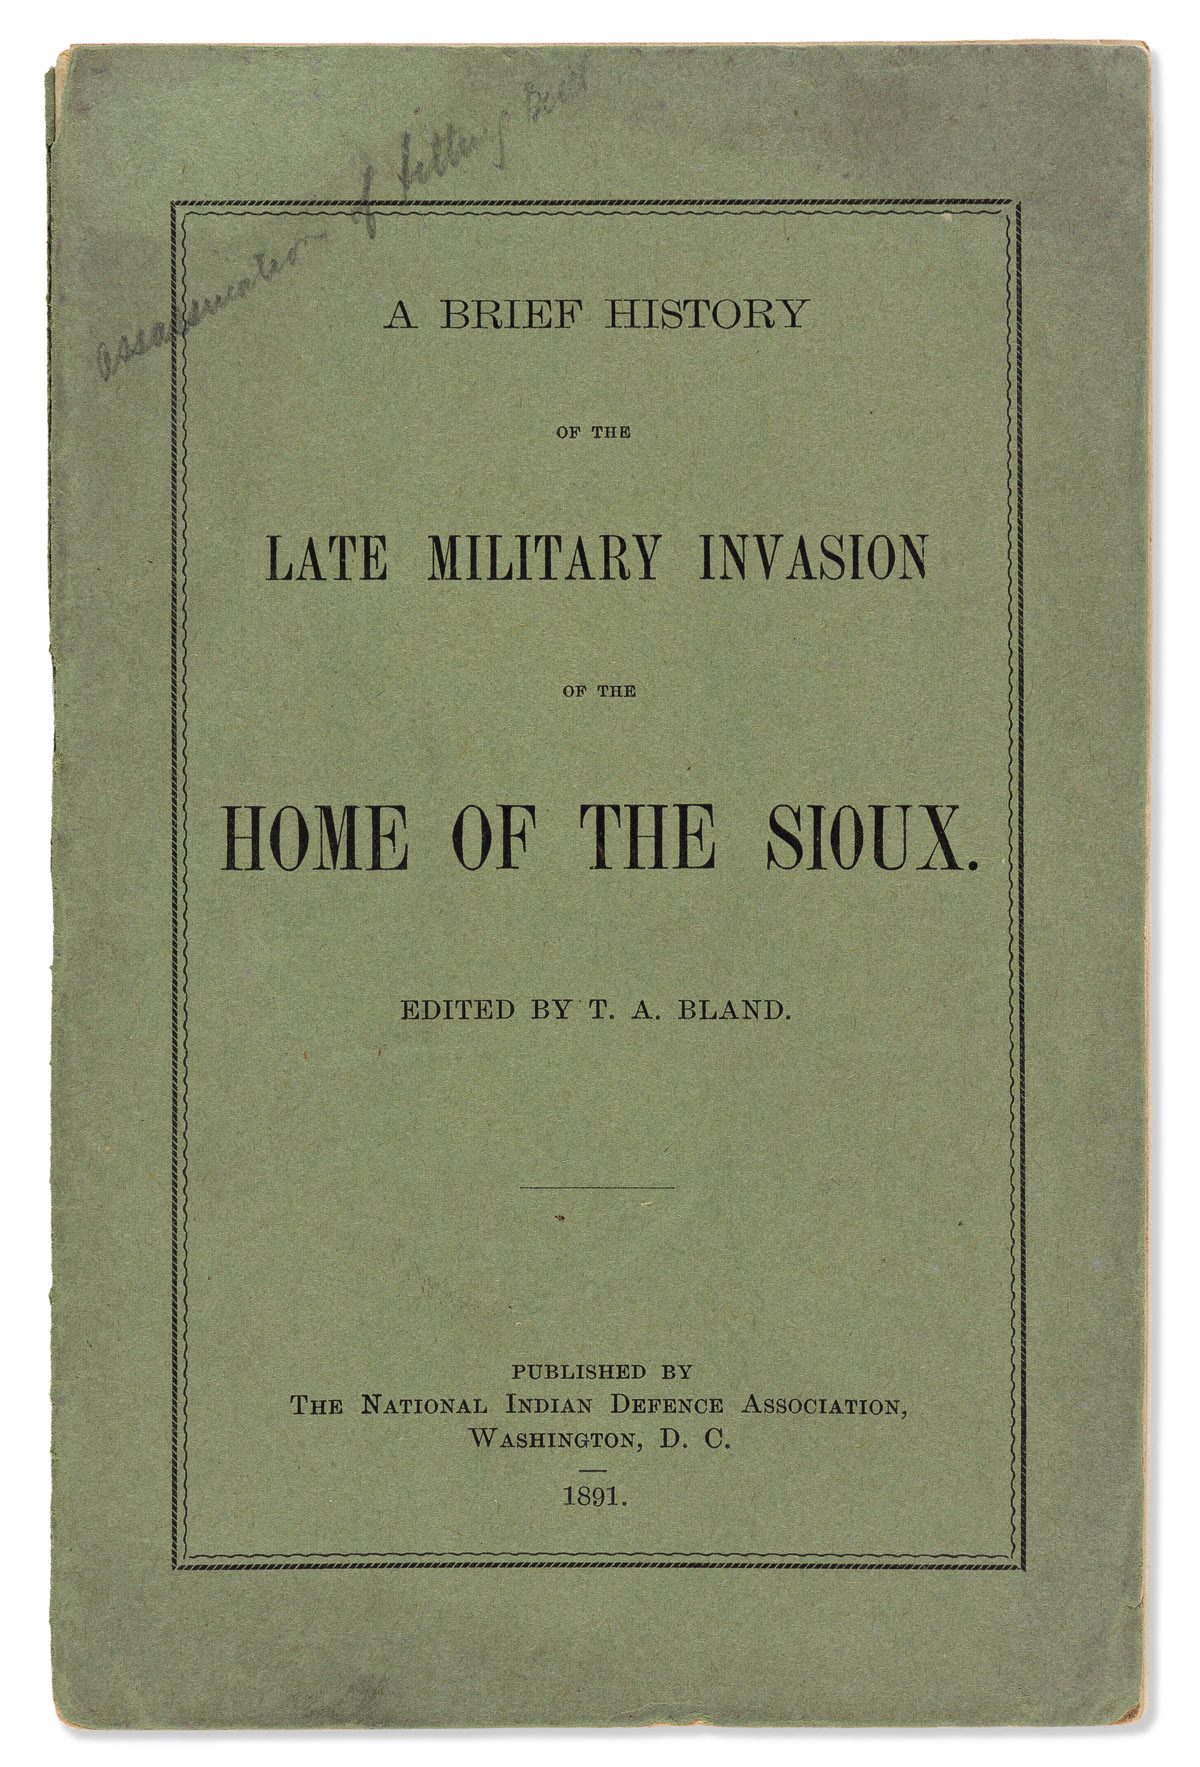 (AMERICAN INDIANS.) Thomas Augustus Bland. A Brief History of the Late Military Invasion of the Home of the Sioux.